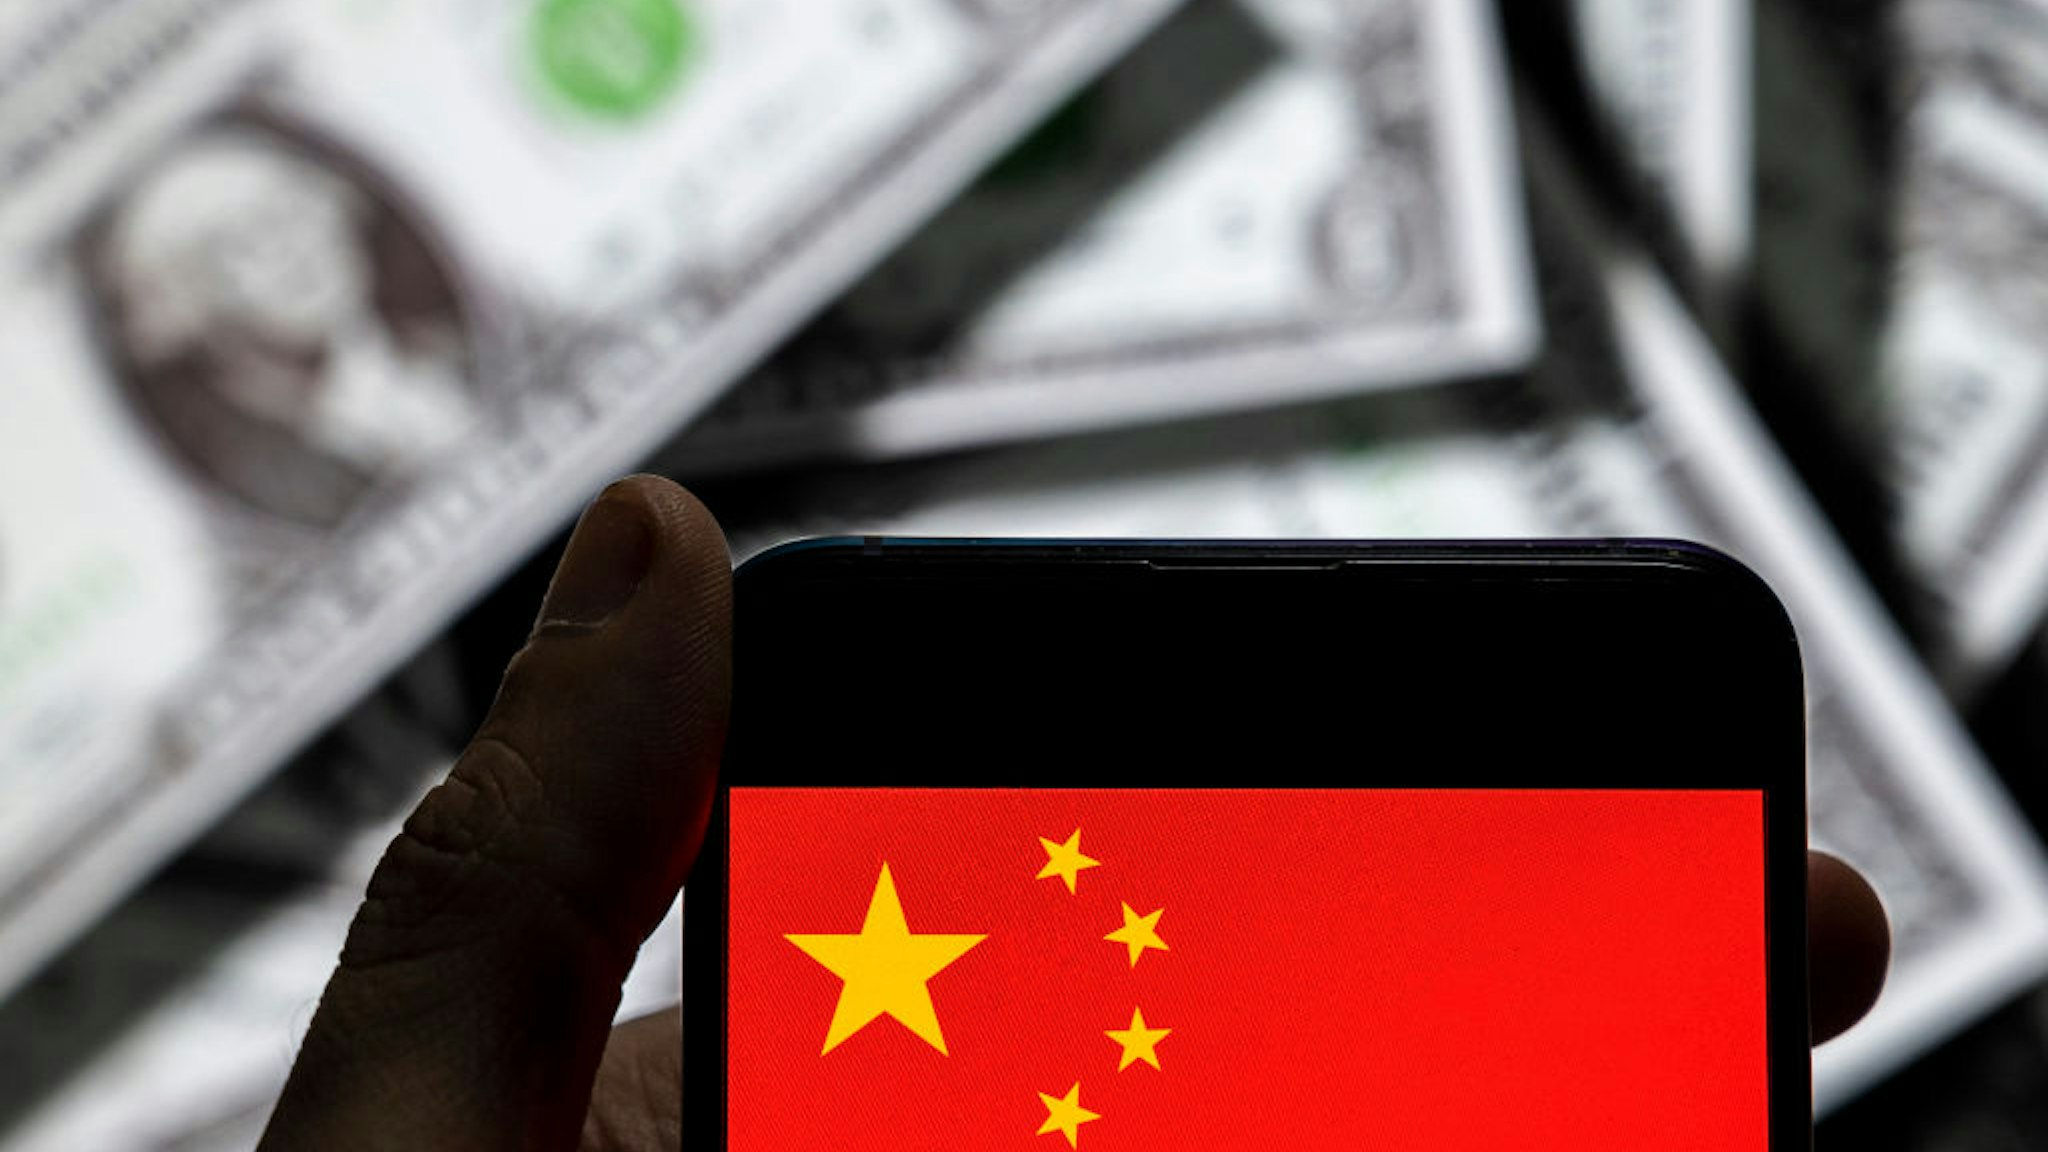 In this photo illustration the People's Republic of China flag logo seen on an Android mobile device screen with the currency of the United States dollar icon, $ icon symbol in the background.